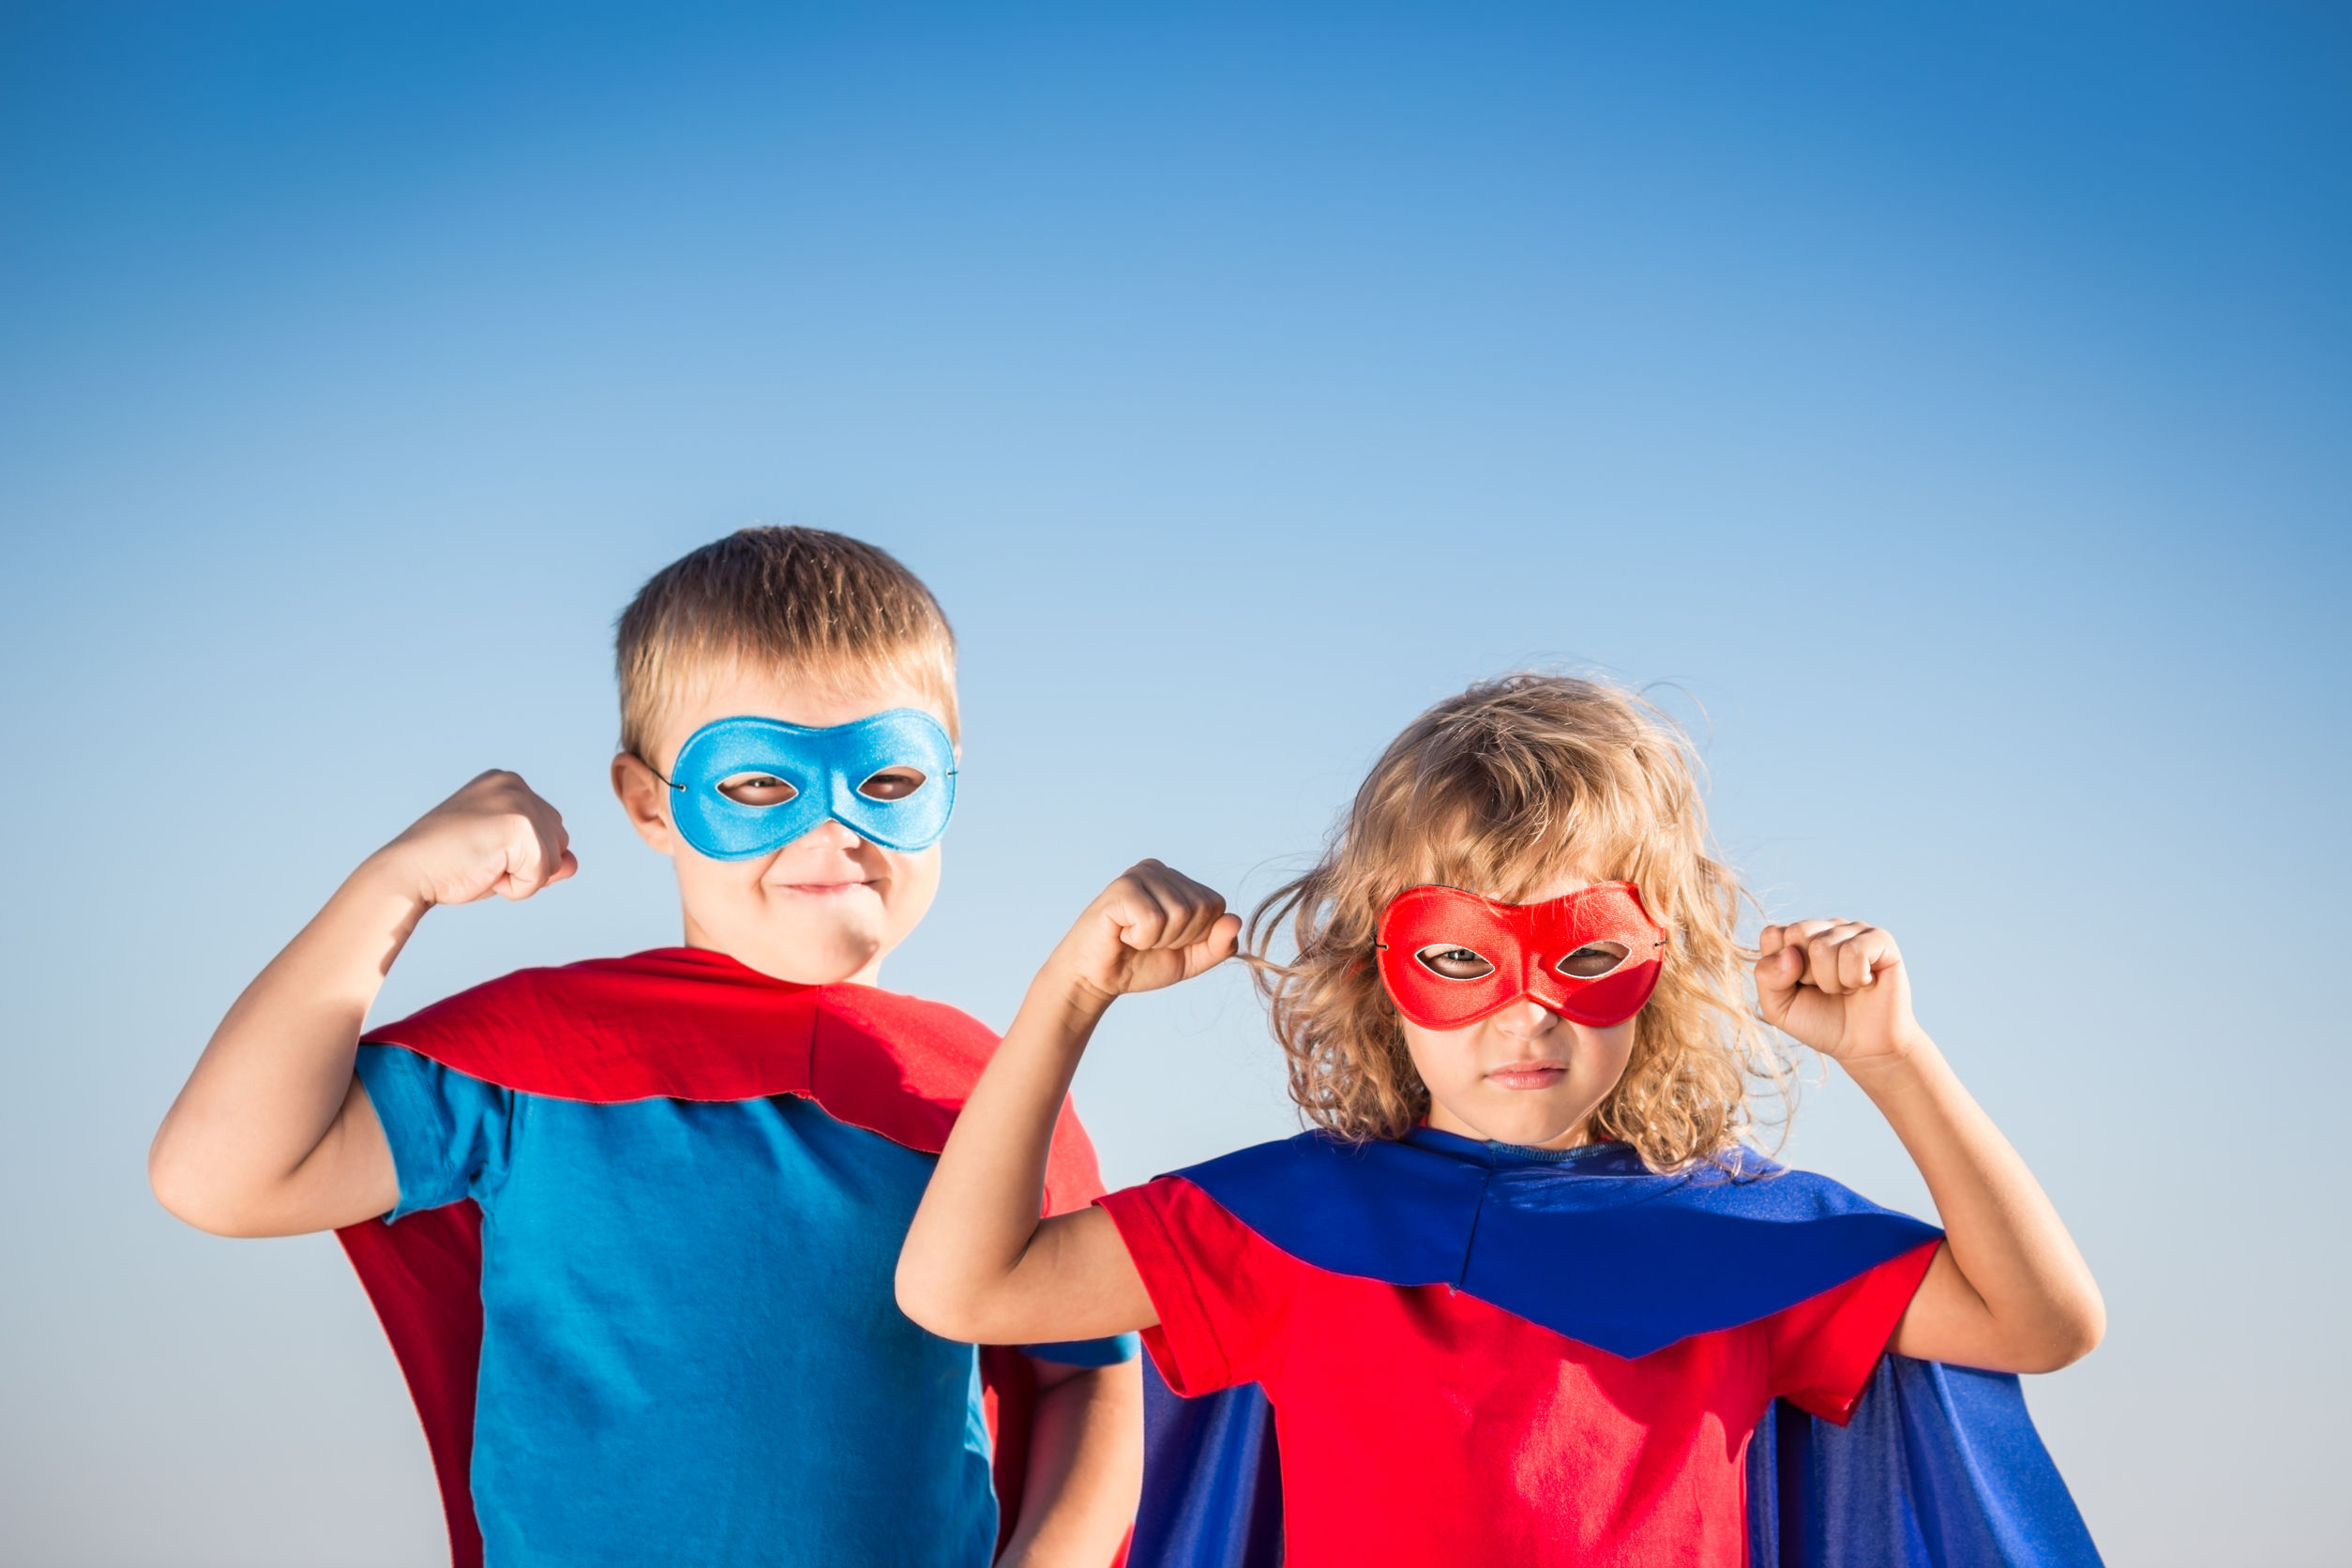 37295599 - superhero children against summer sky background. kids having fun outdoors. boy and girl playing. success and winner concept